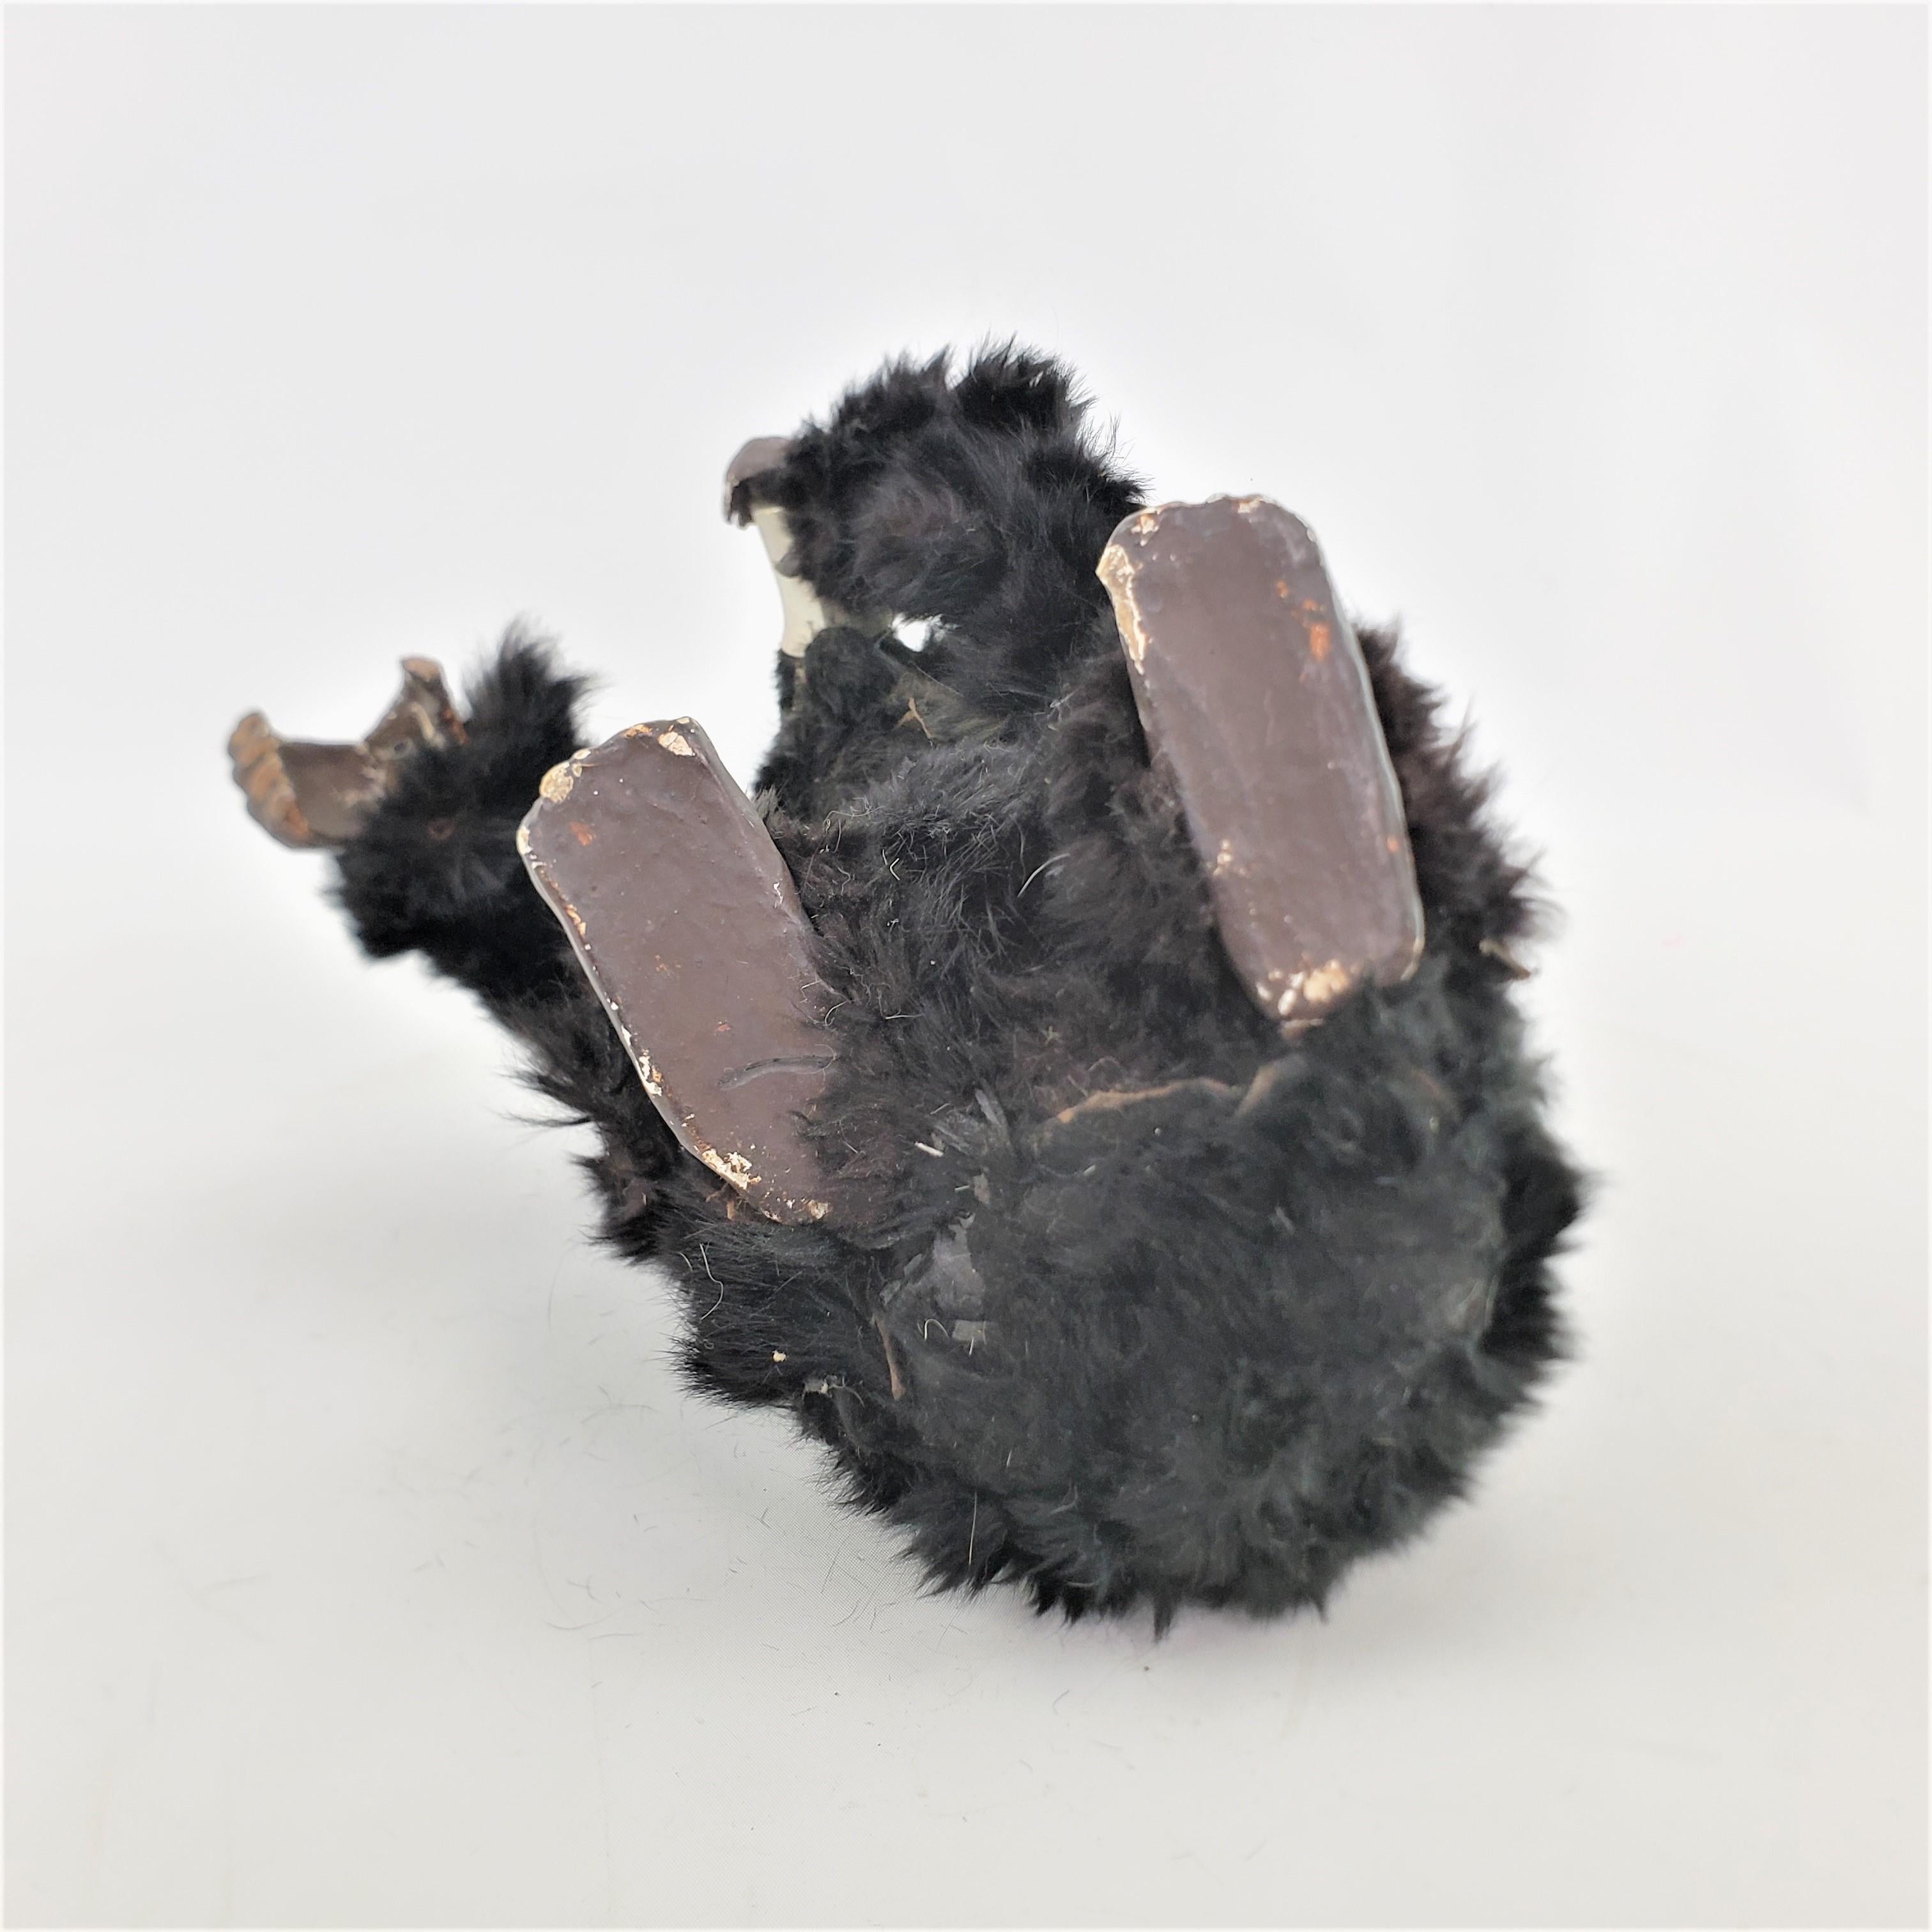 19th Century Antique Victorian Key Wind Mechanical Large Black Bear Child's Toy, As Found For Sale